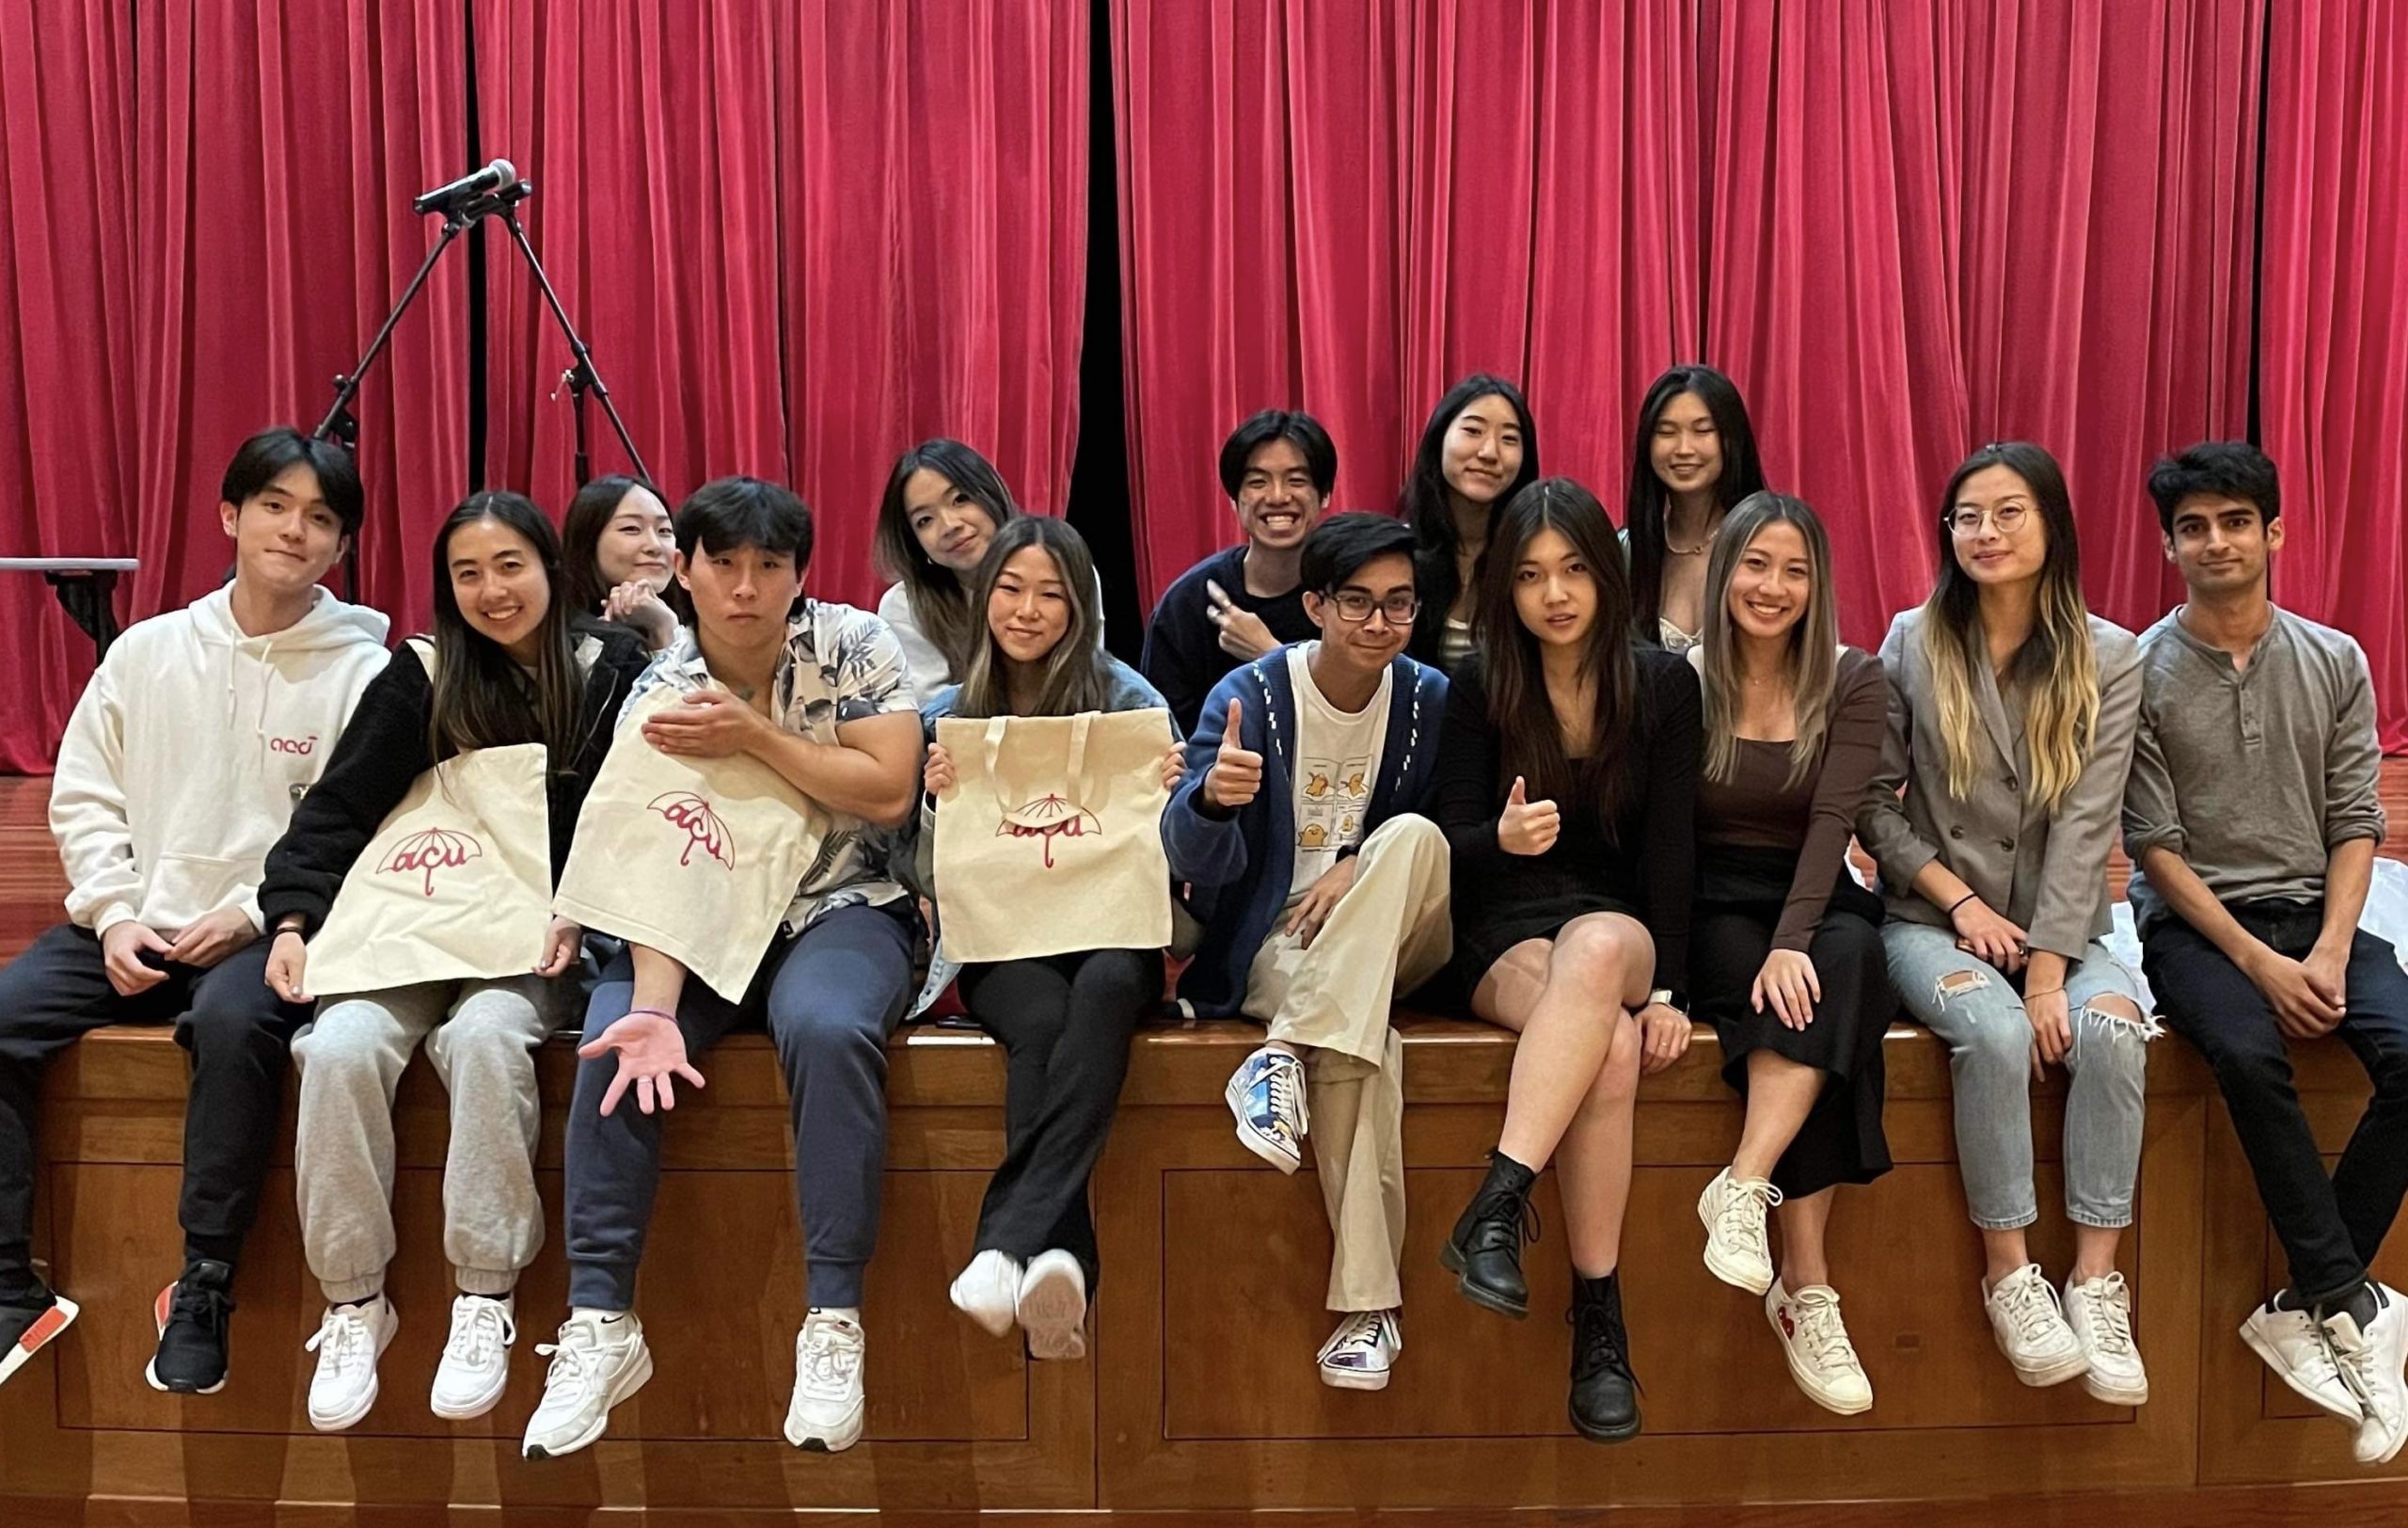 Students sitting on a stage and smiling with ACU tote bags.